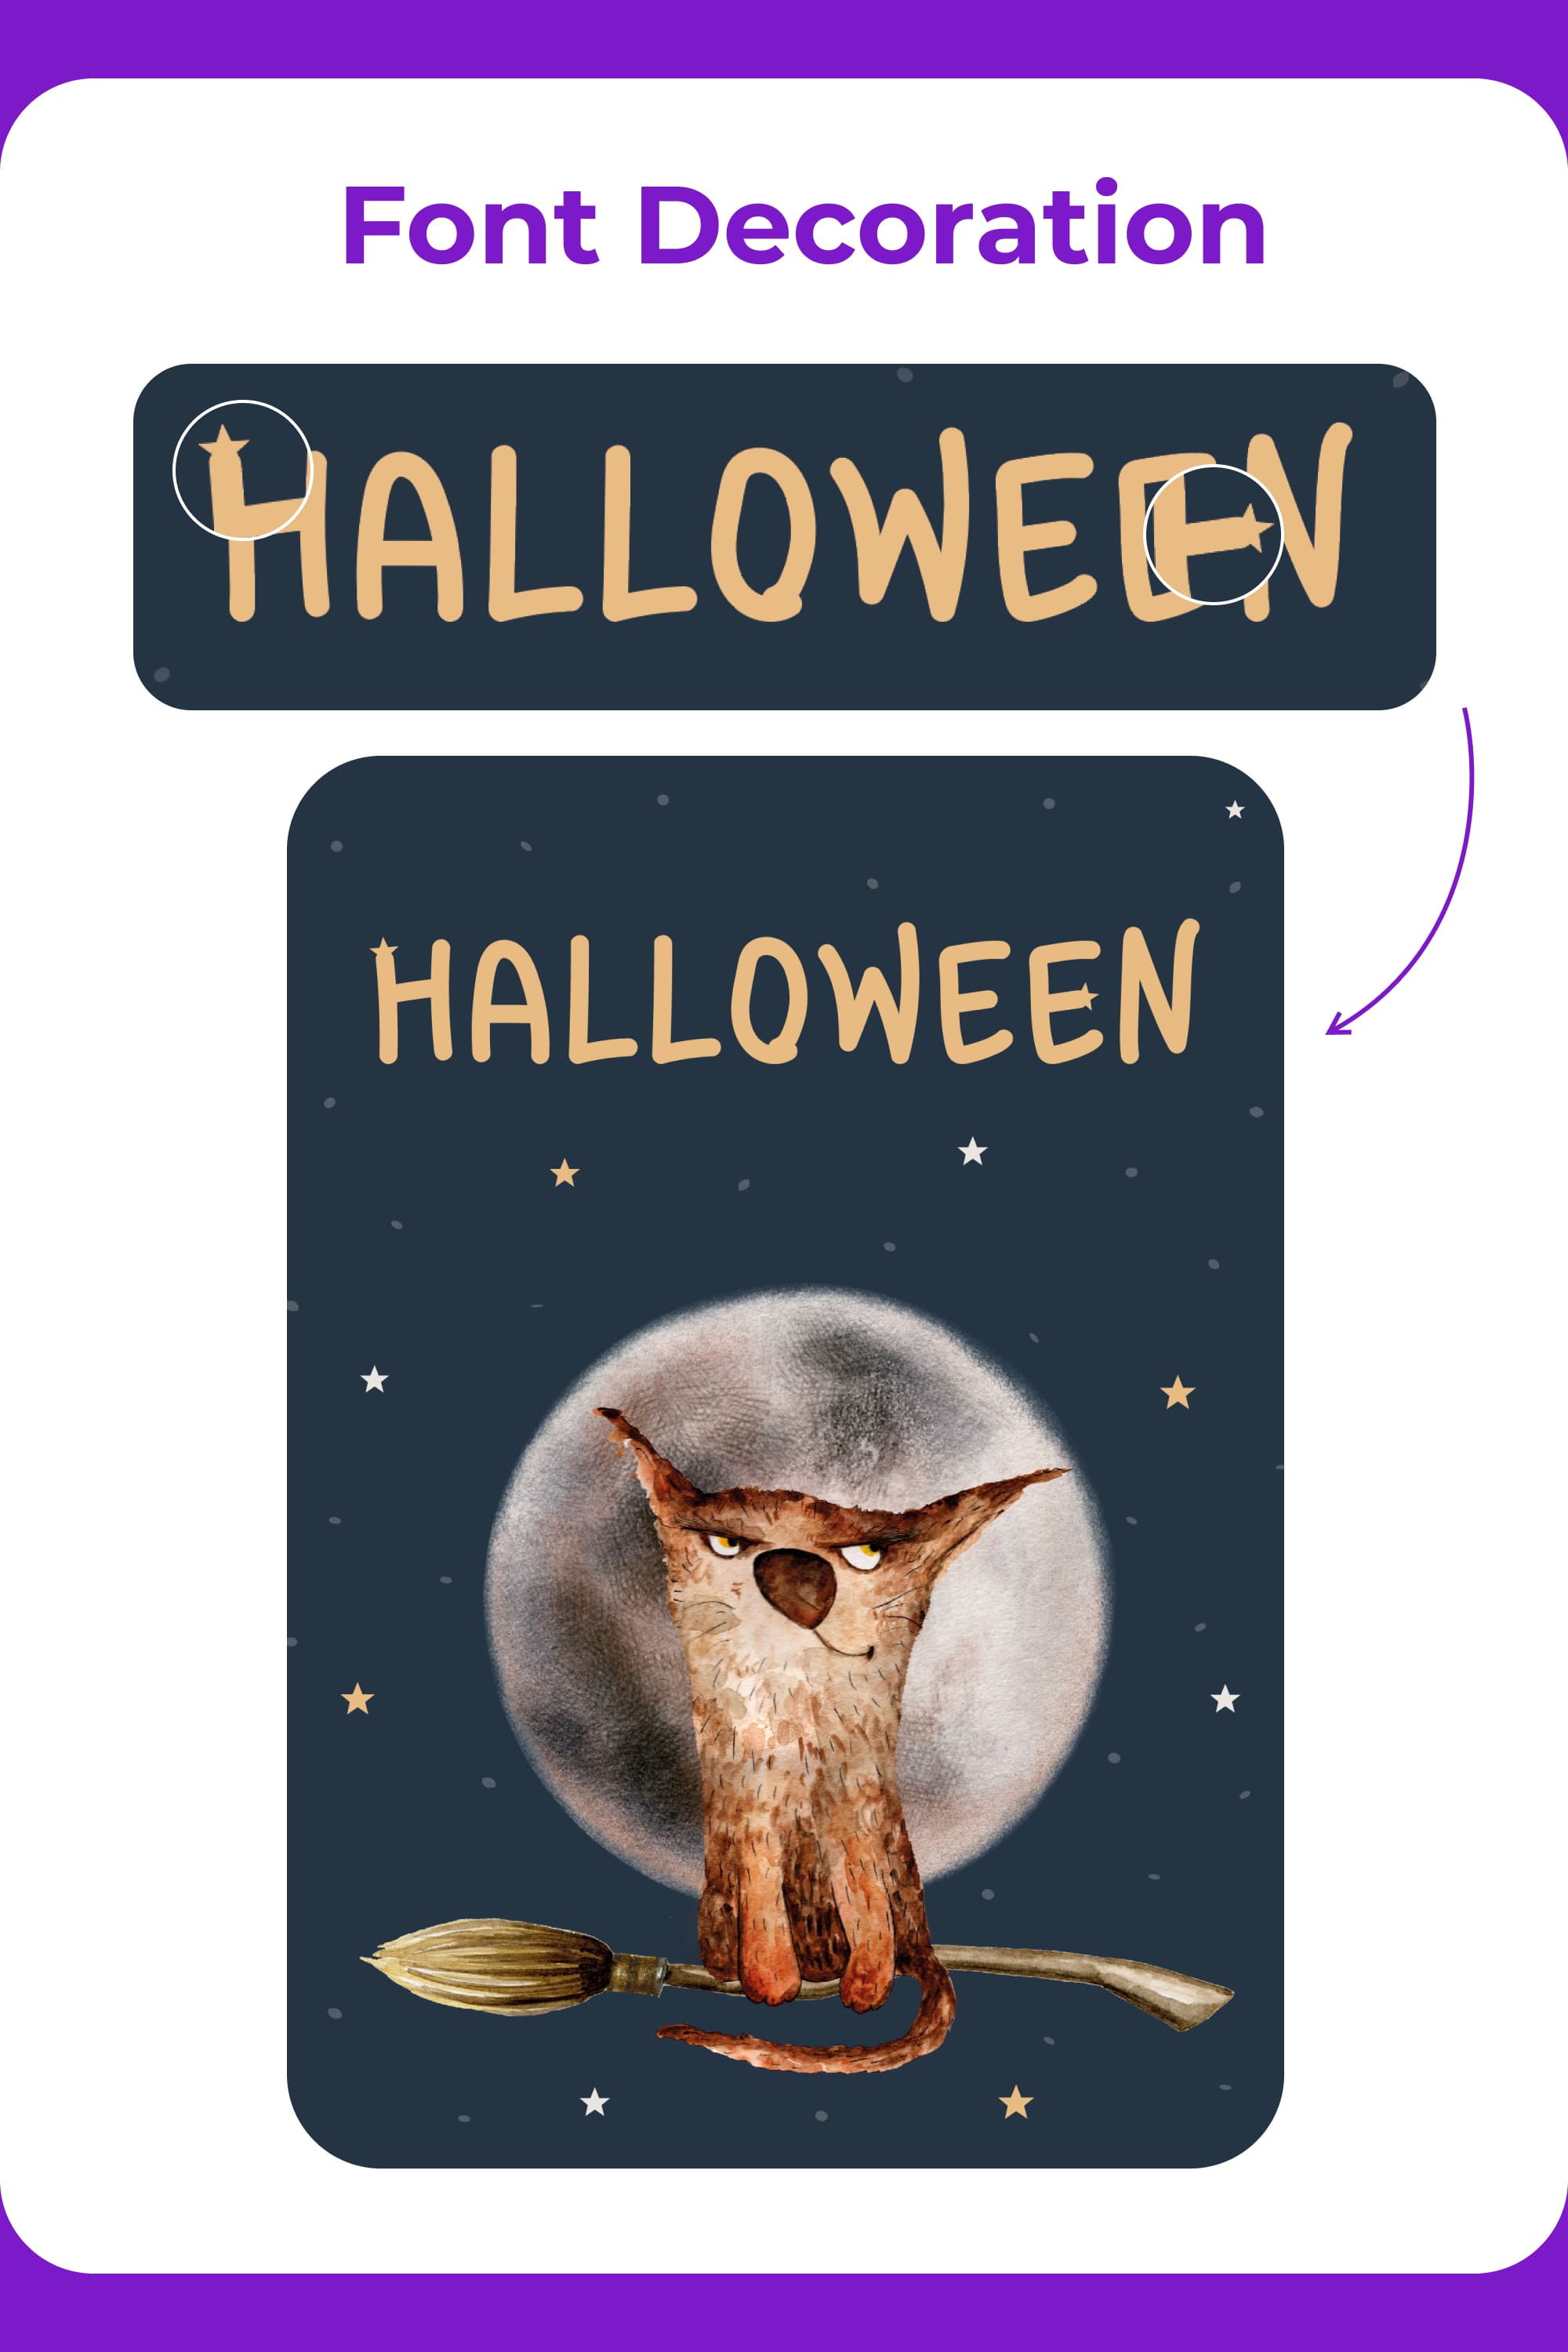 creating the graphic part of the halloween card - font decoration.